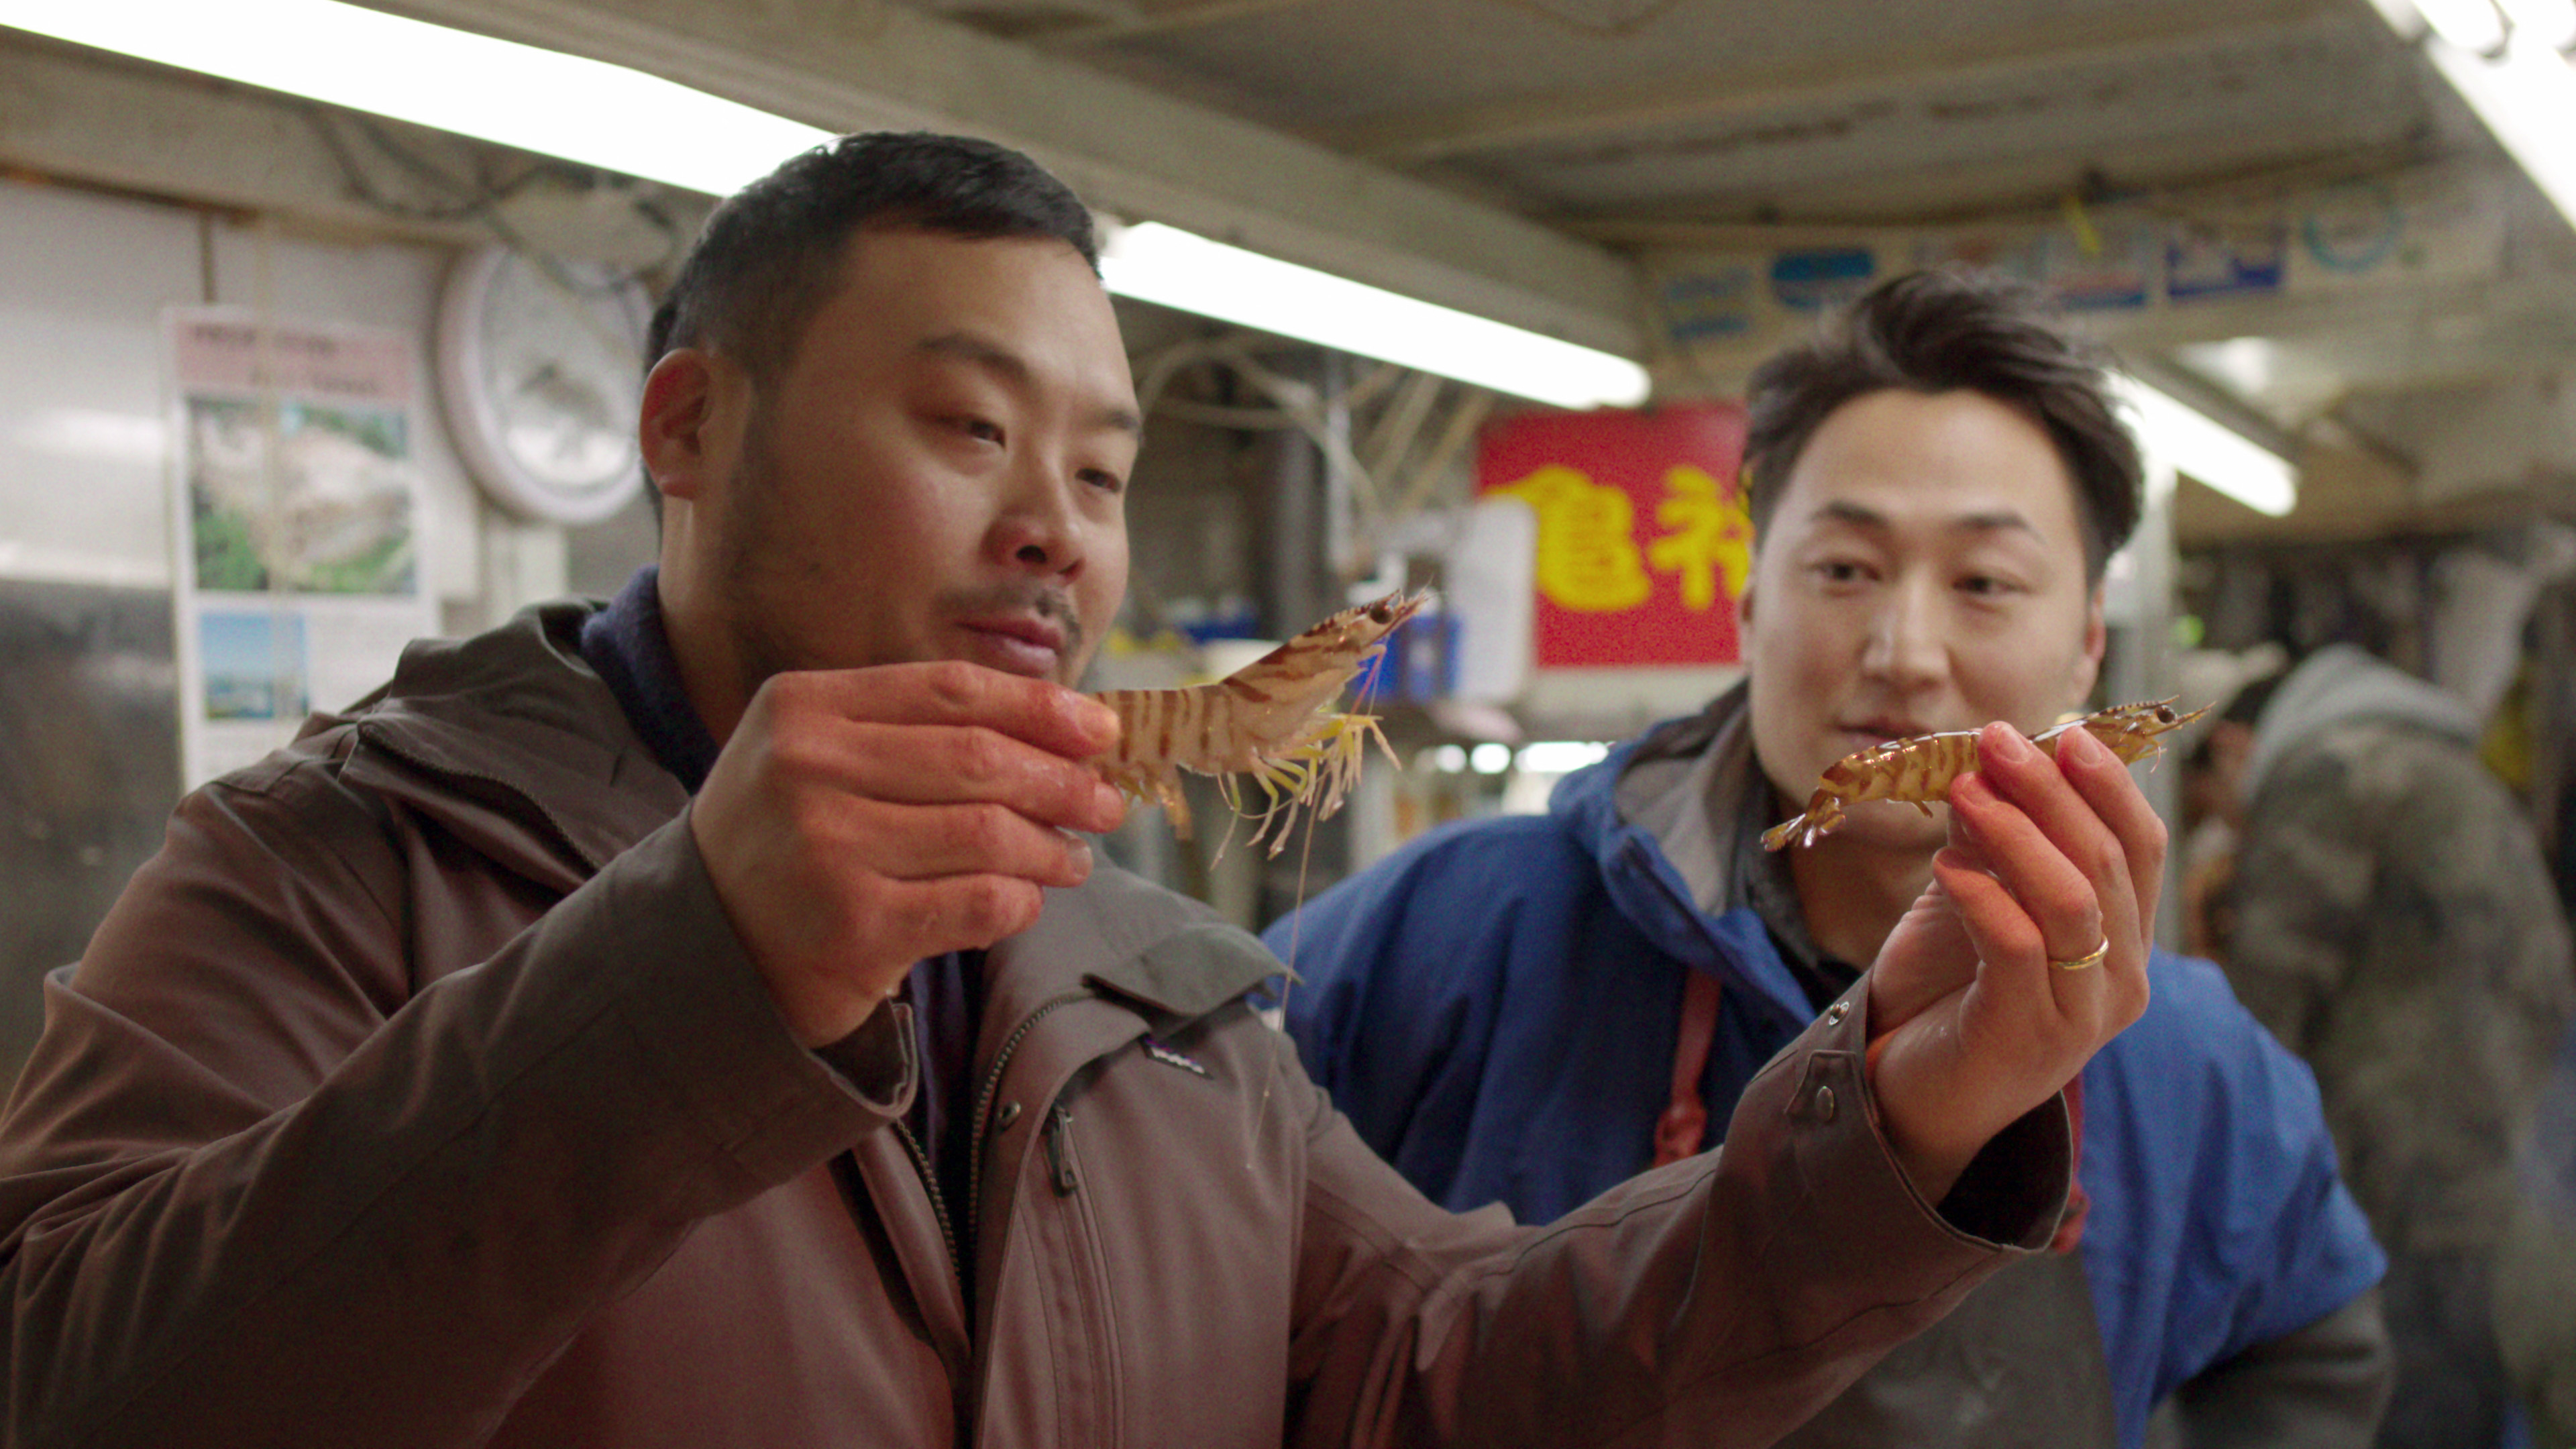 Two men smiling, holding and examining live shrimp at a seafood market